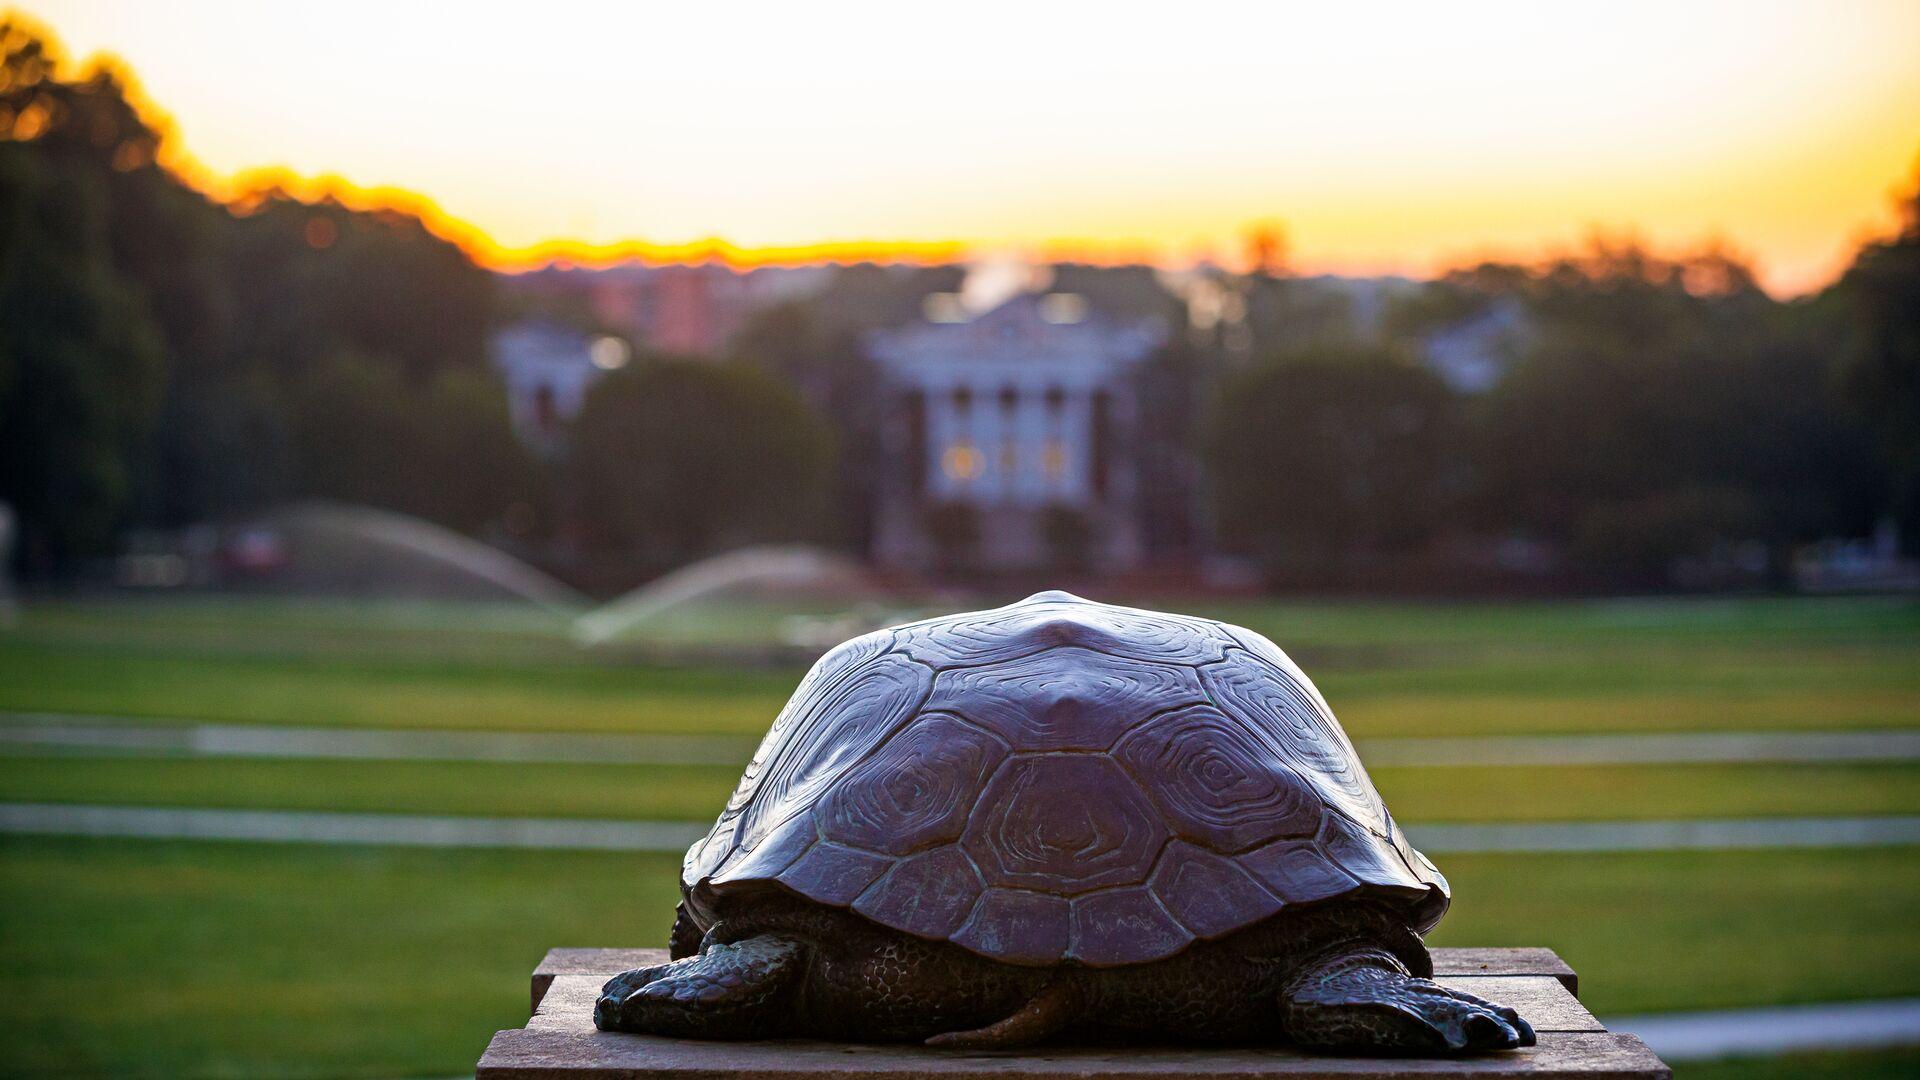 View of Mckeldin Mall from Testudo's point of view